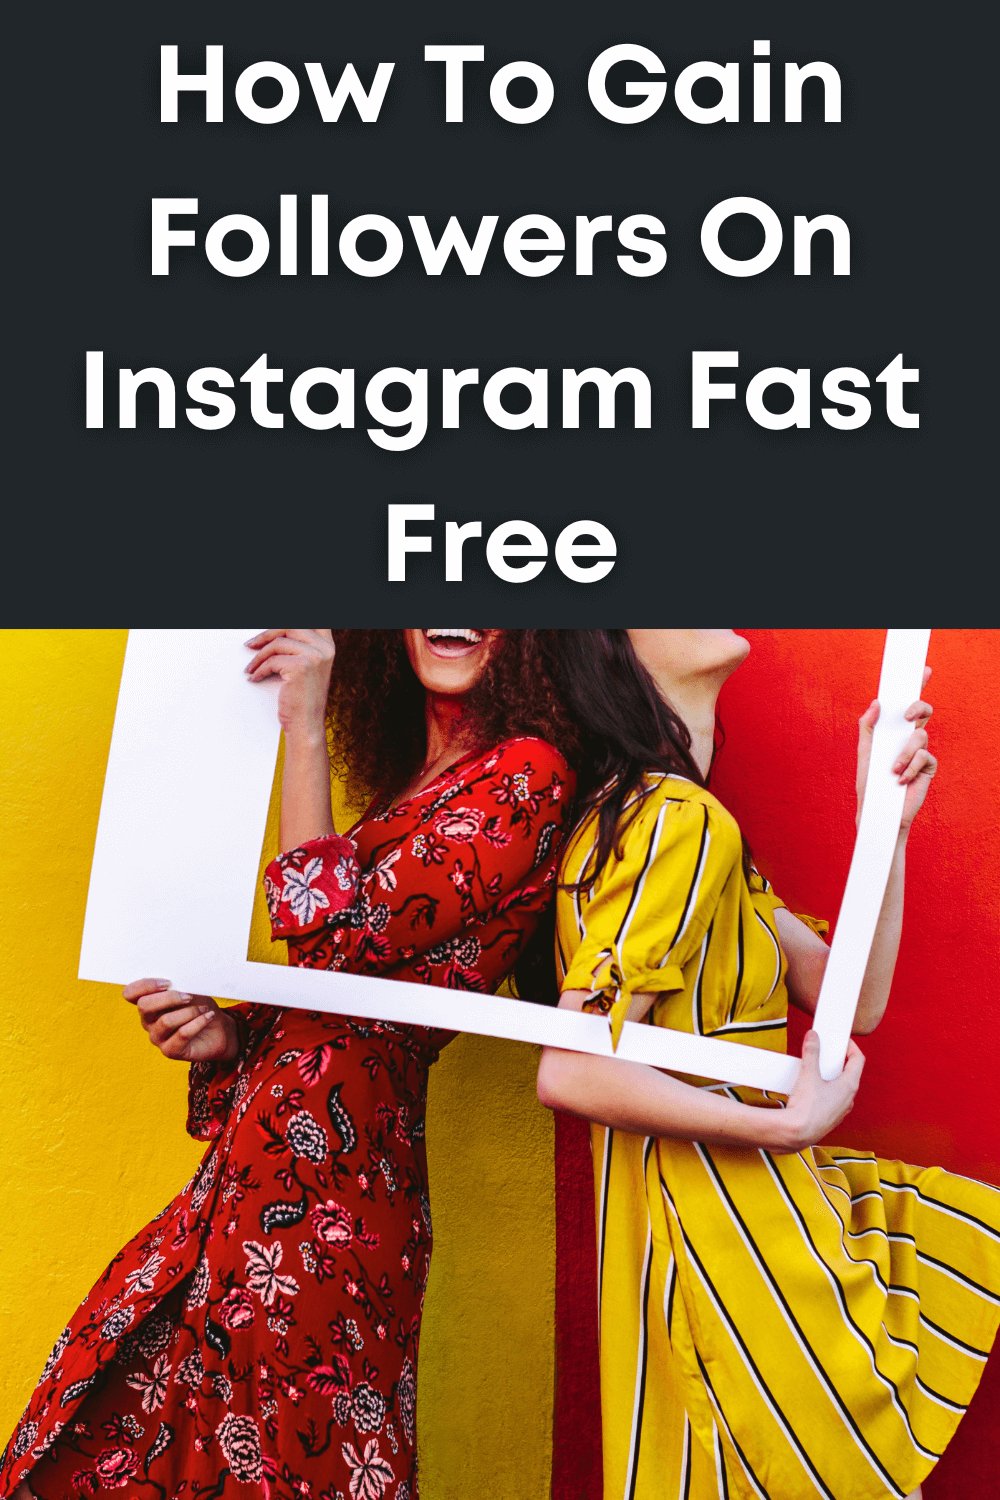 How To Gain Followers On Instagram Fast Free